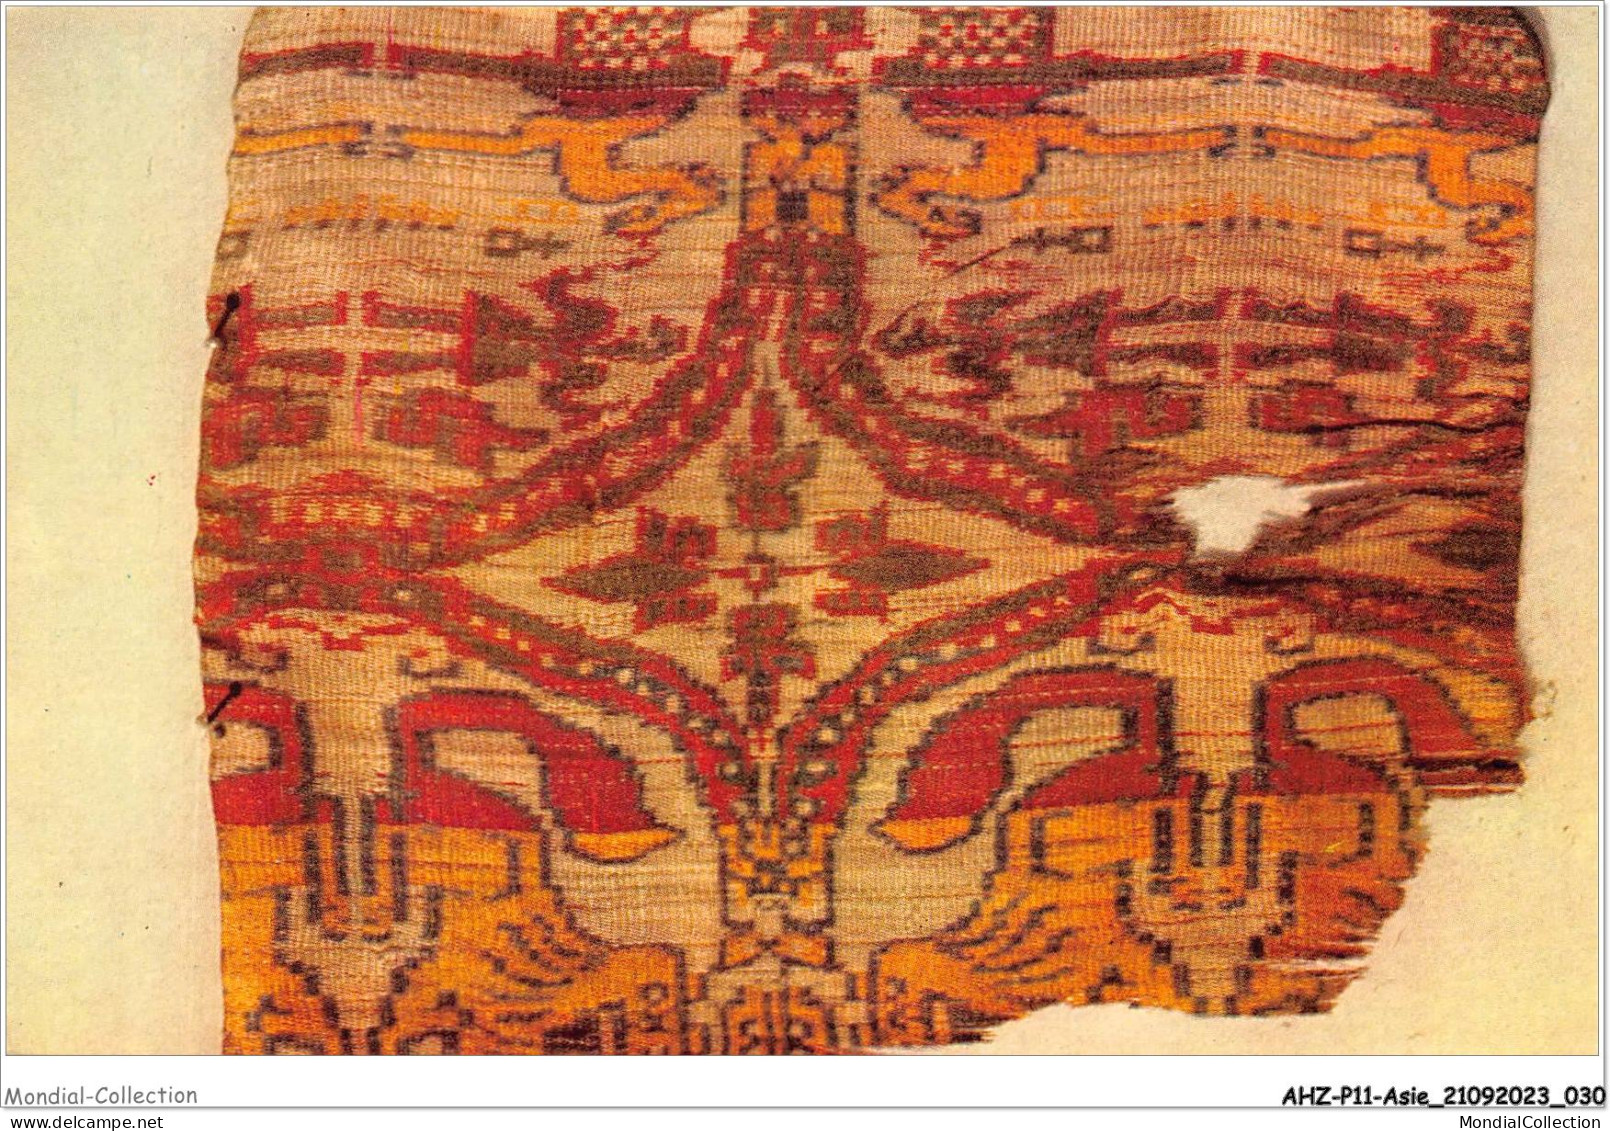 AHZP11-CHINE-0996 - SILK DAMASK WITH THE PATTERN OF CAMELS AND LIONS IN PAIRS - NORTHERN DYNASTY - TURFAN - China